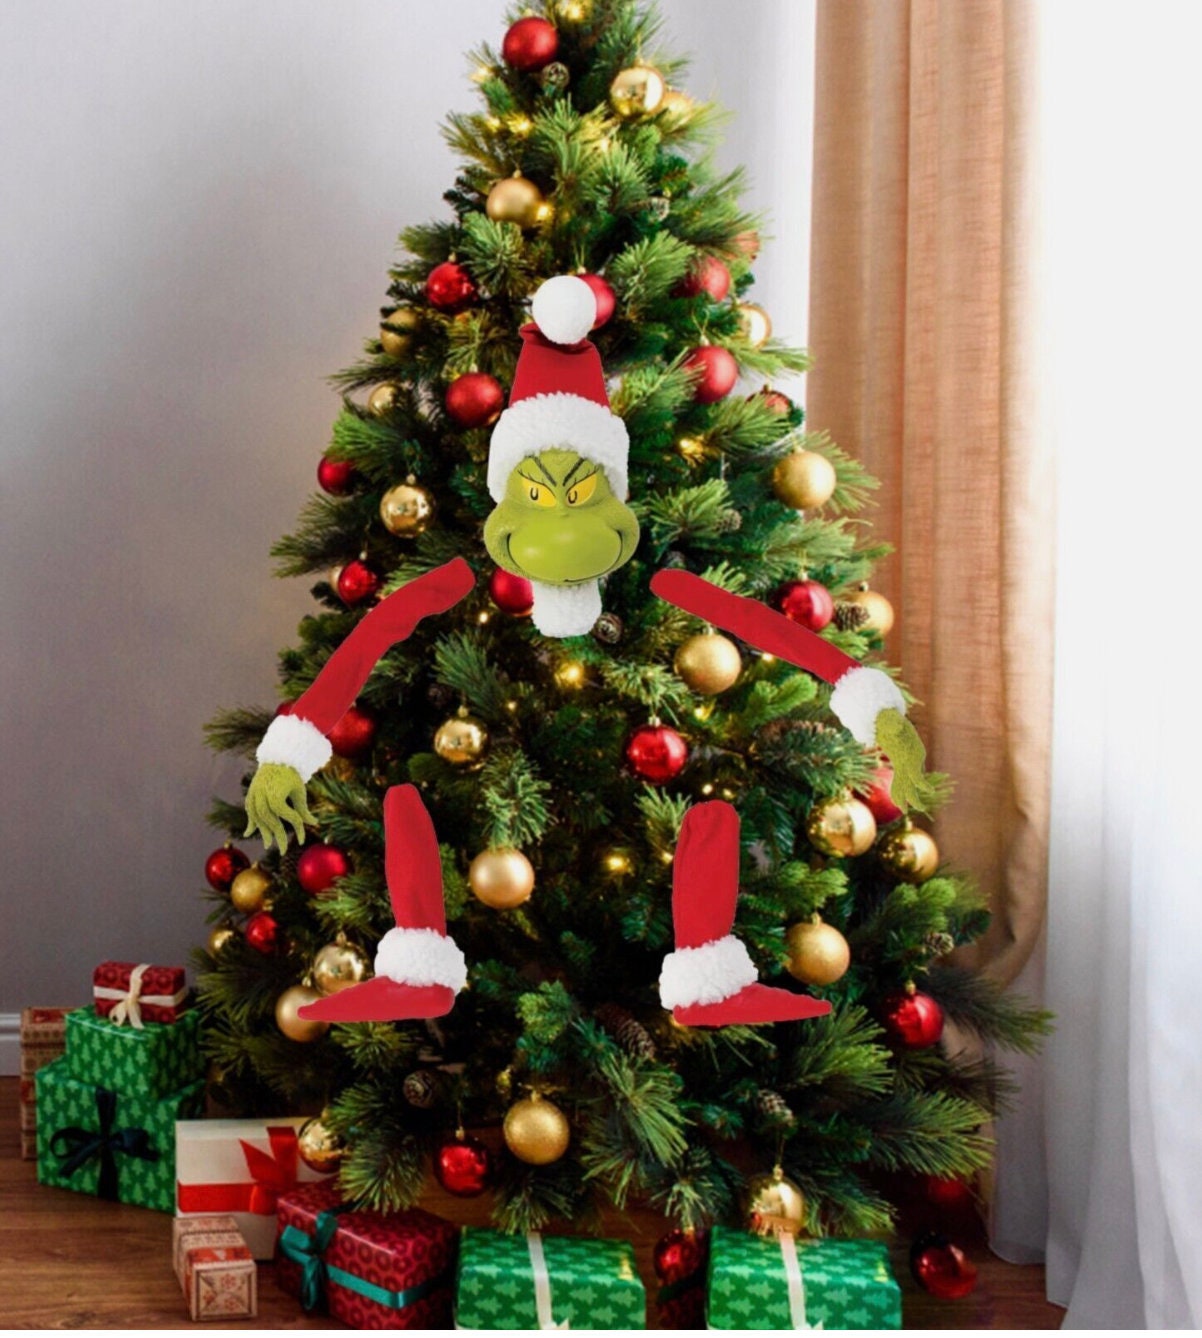 We've got everything you need for your Grinch collection! From Grinch trees  to decor, mugs, tree skirts, tree toppers, ornaments and…